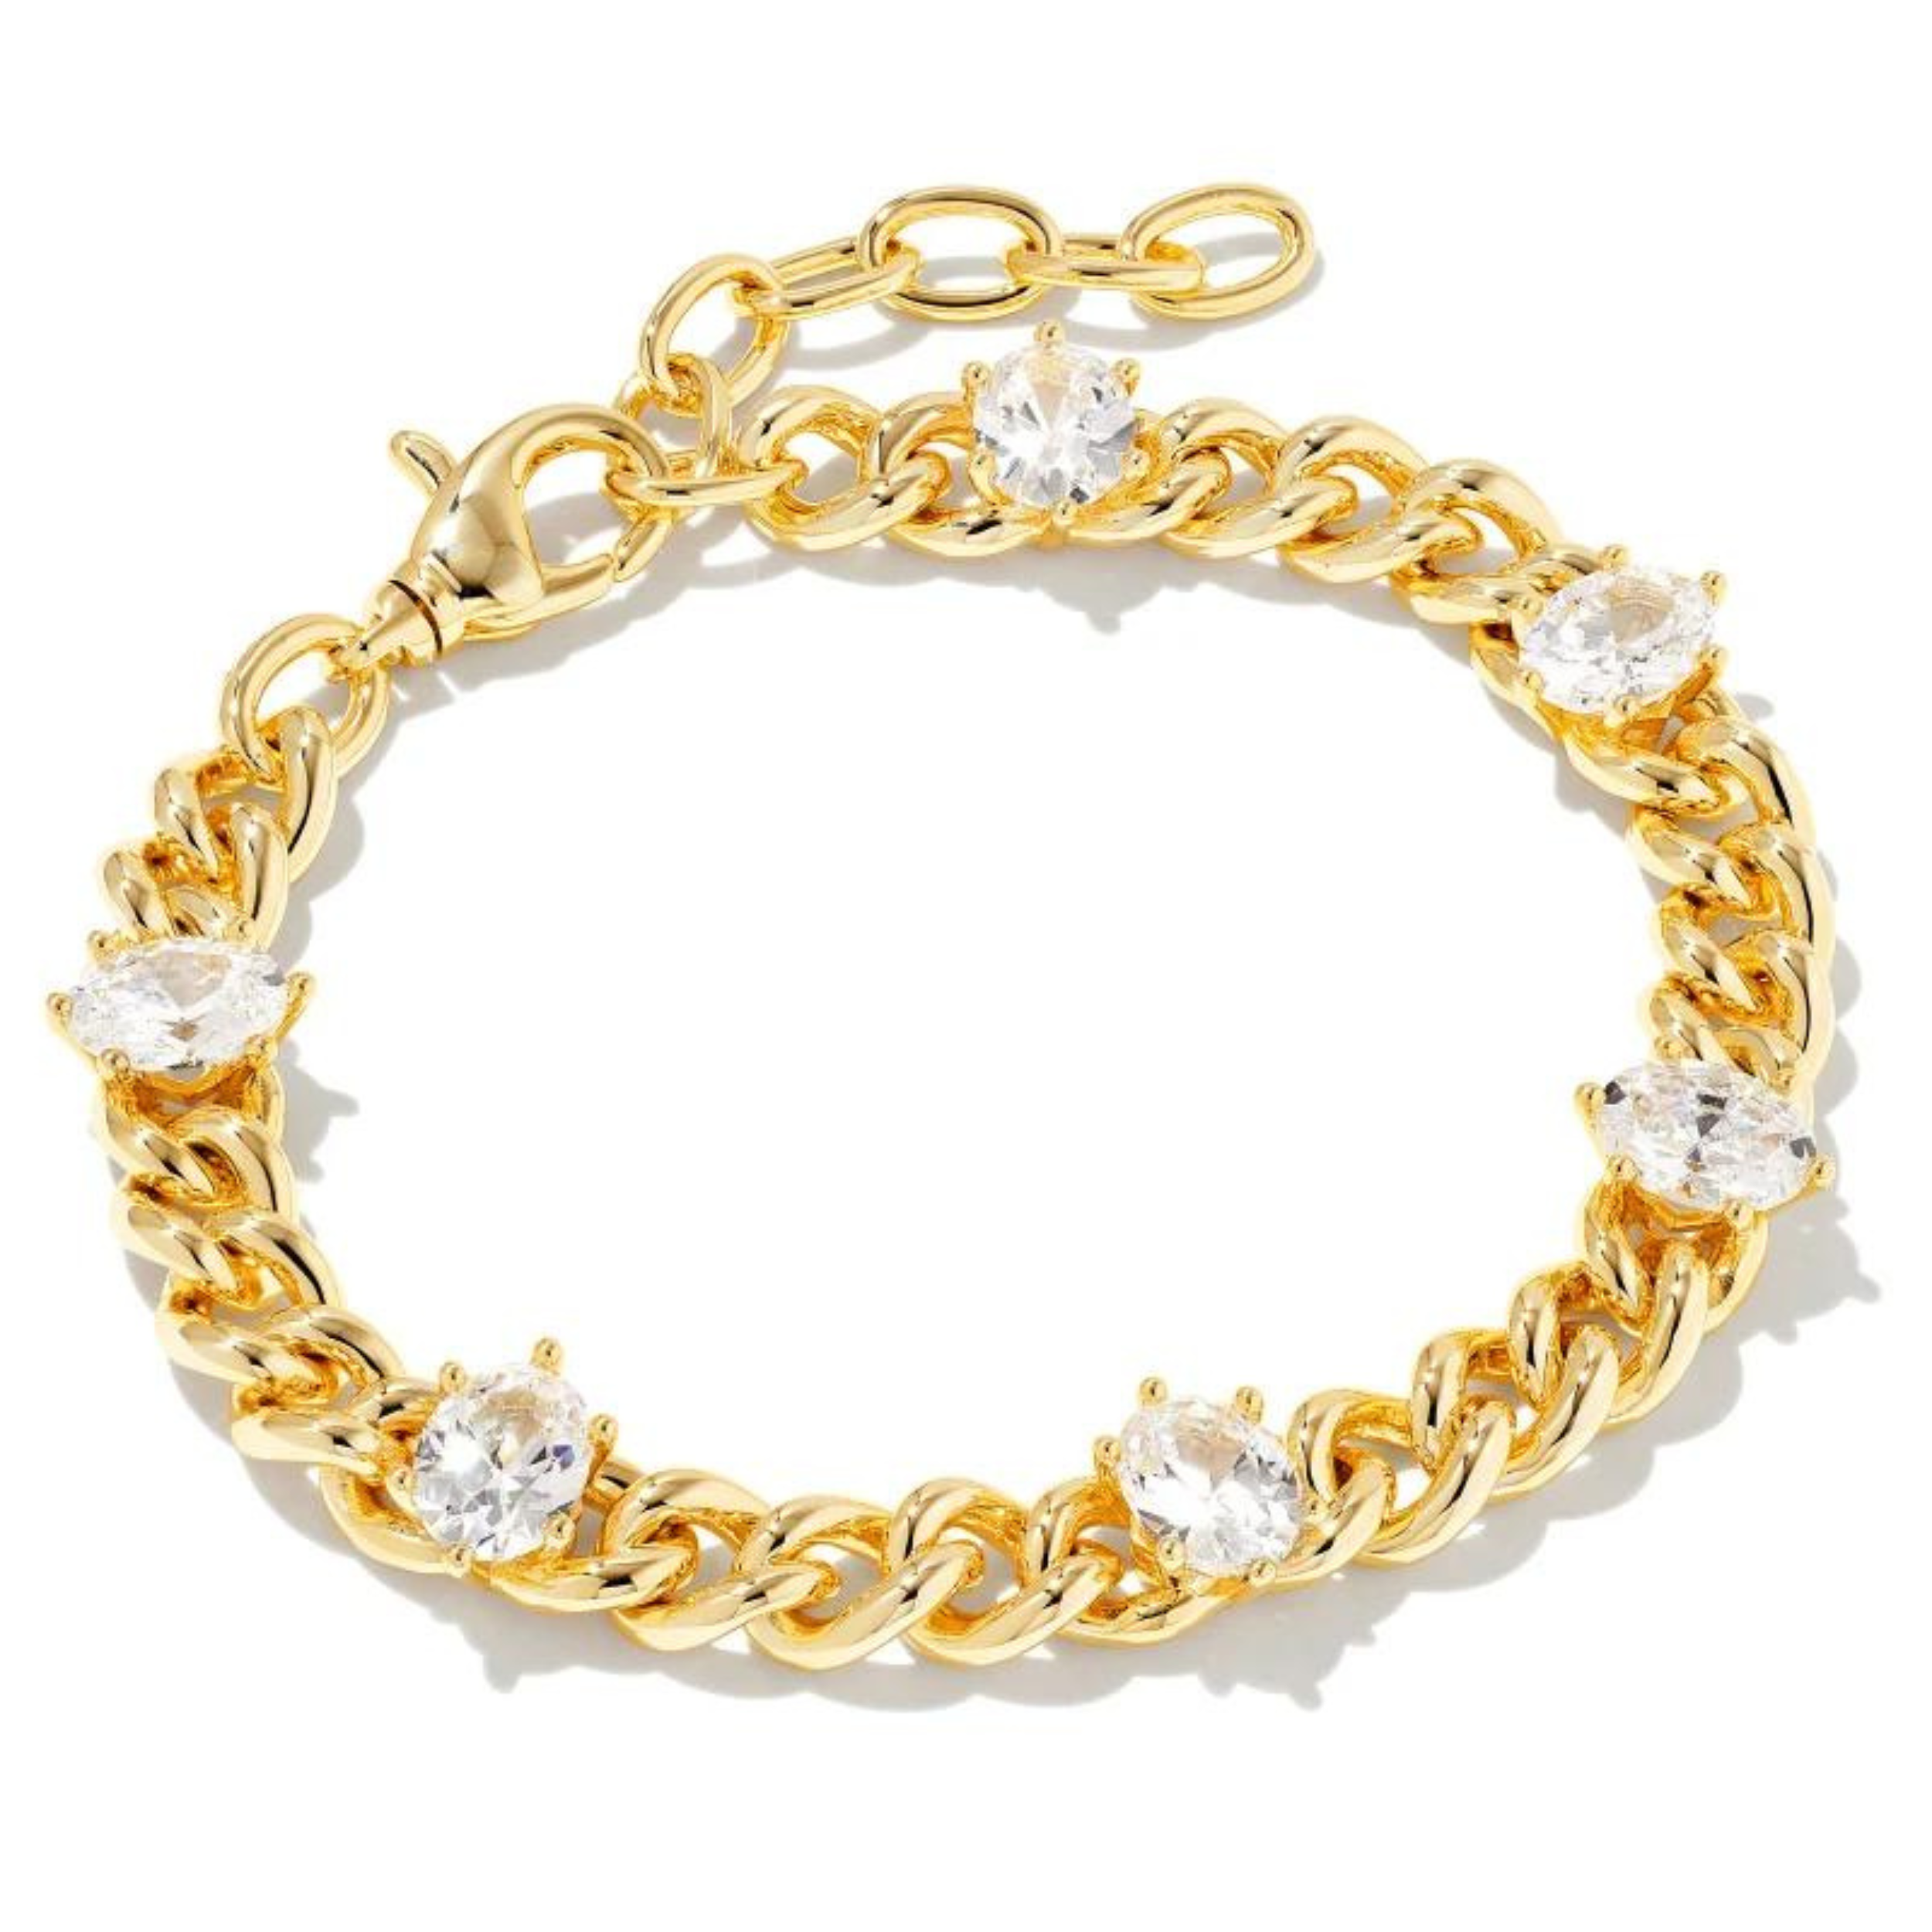 Gold chain bracelet with white crystals, pictured on a white background.